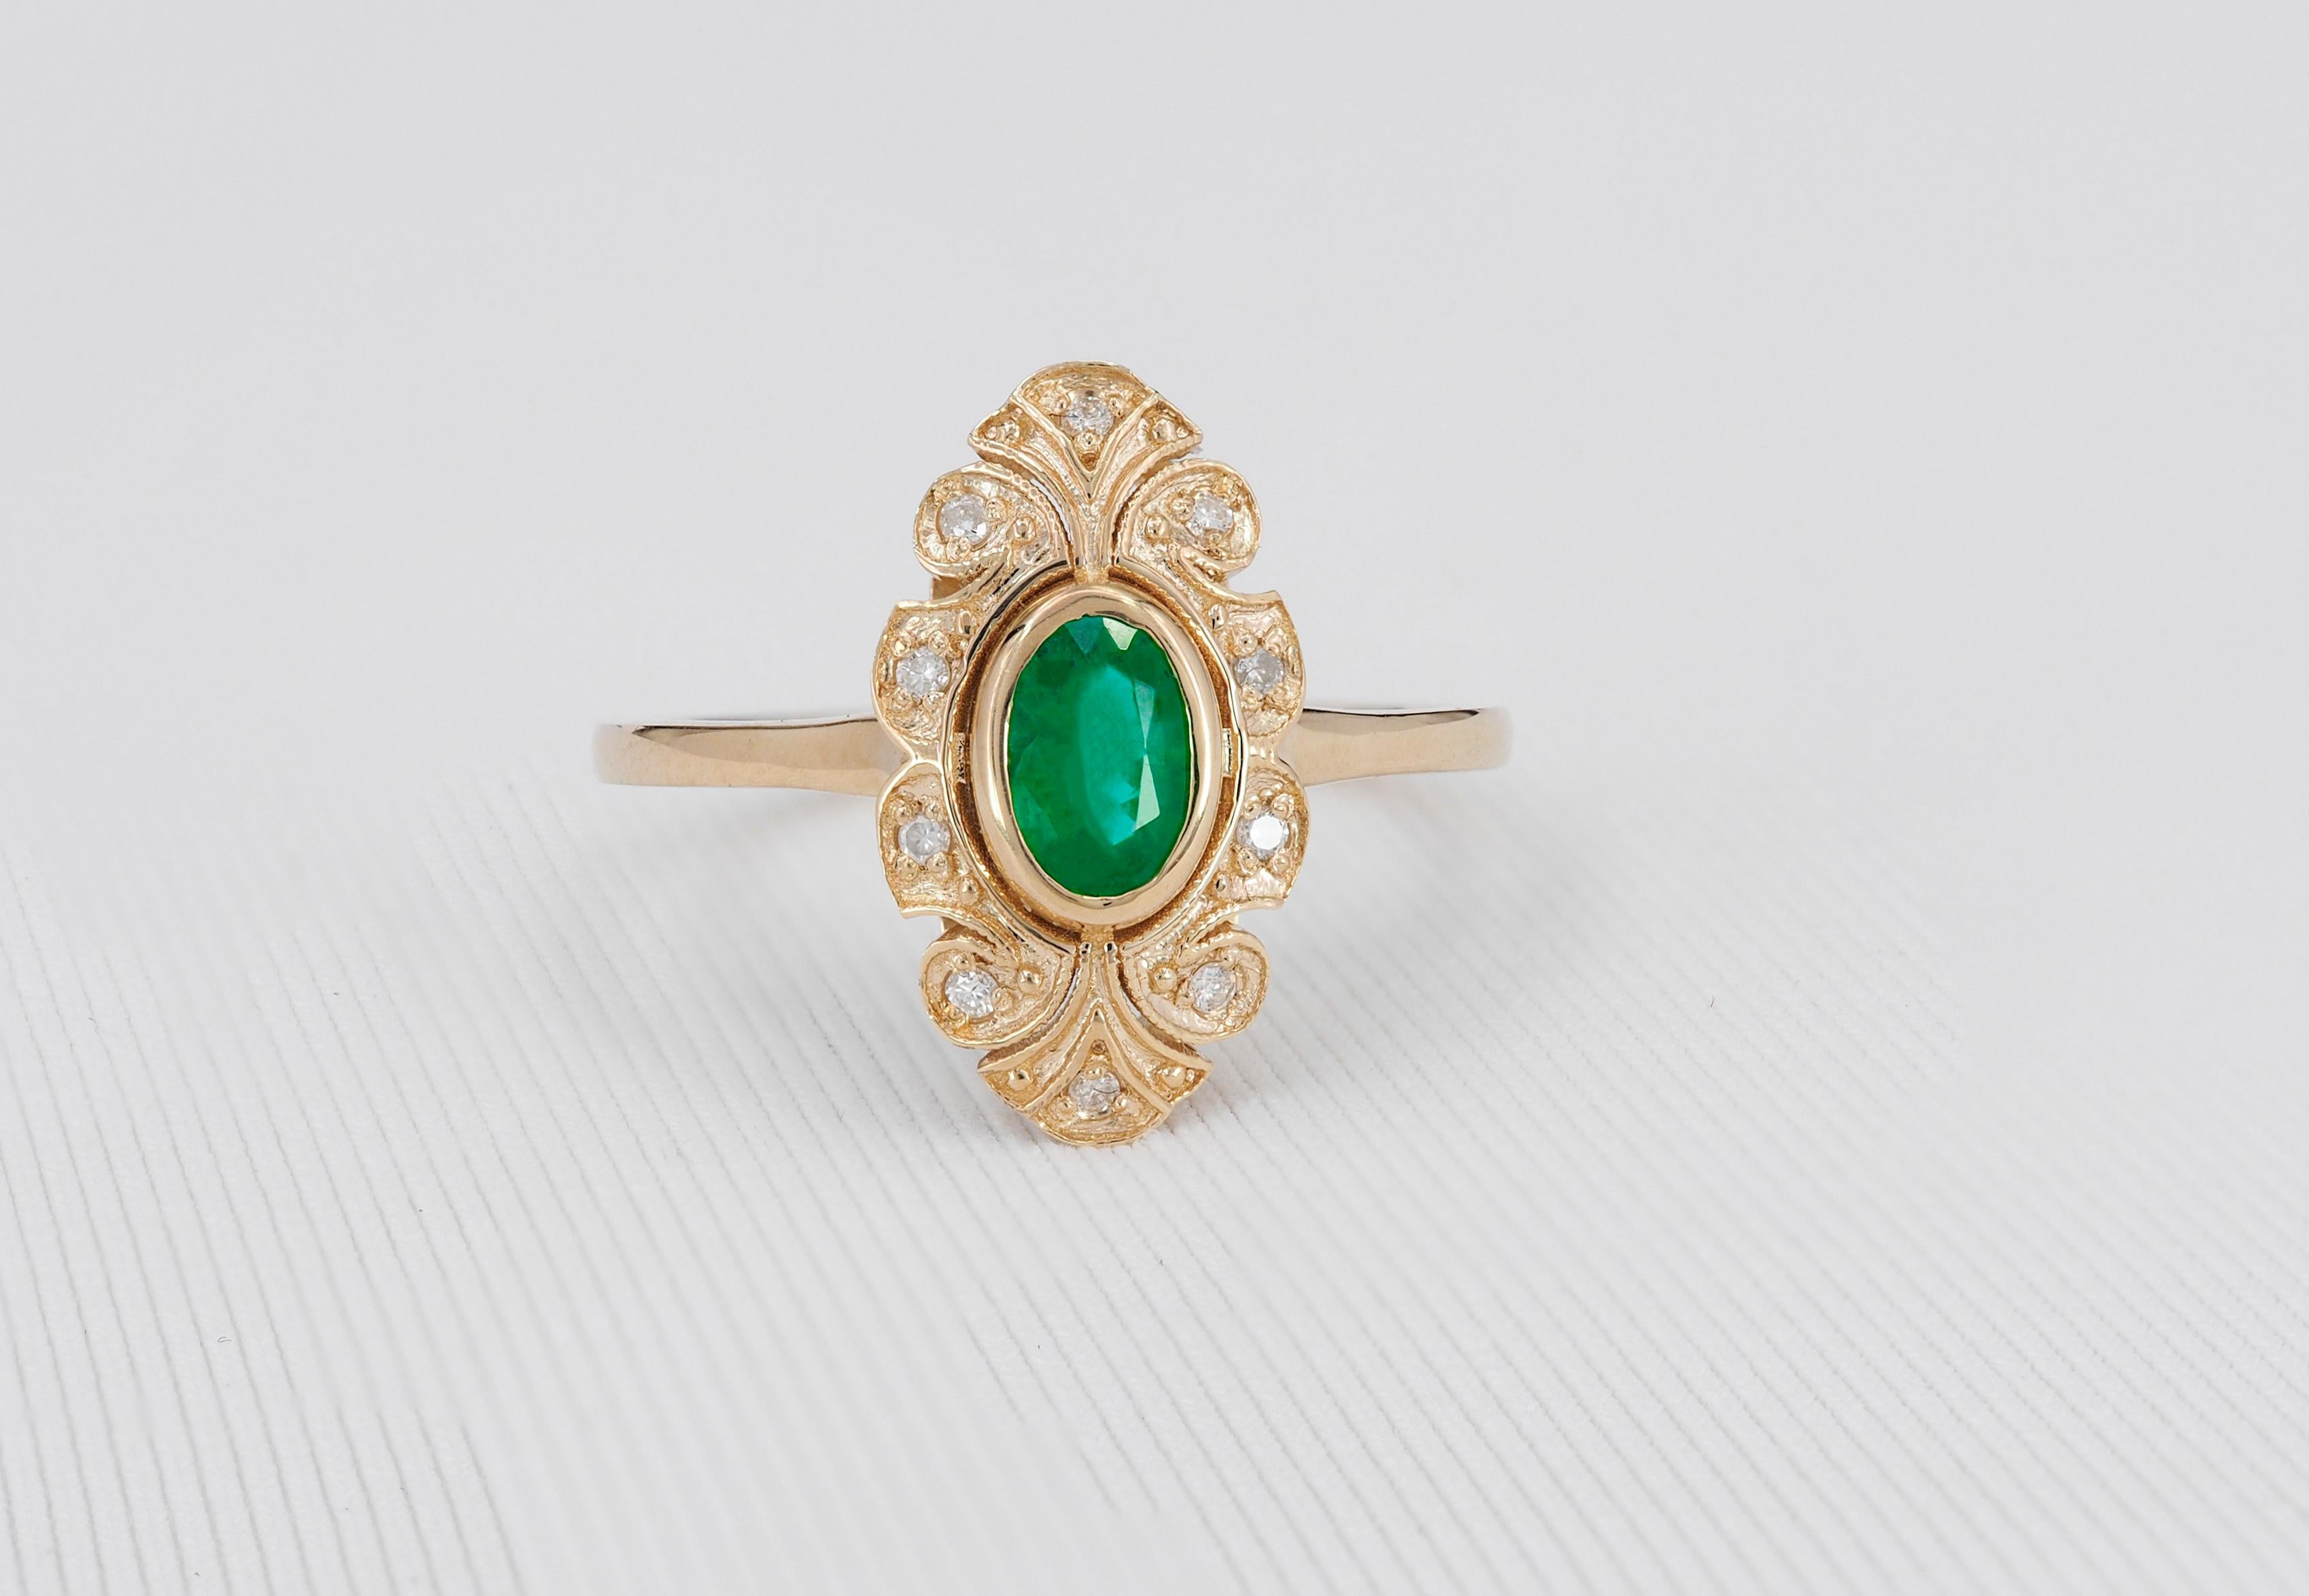 For Sale:  14k Gold Ring with Oval Emerald and Diamonds, Vintage Inspired Ring 2